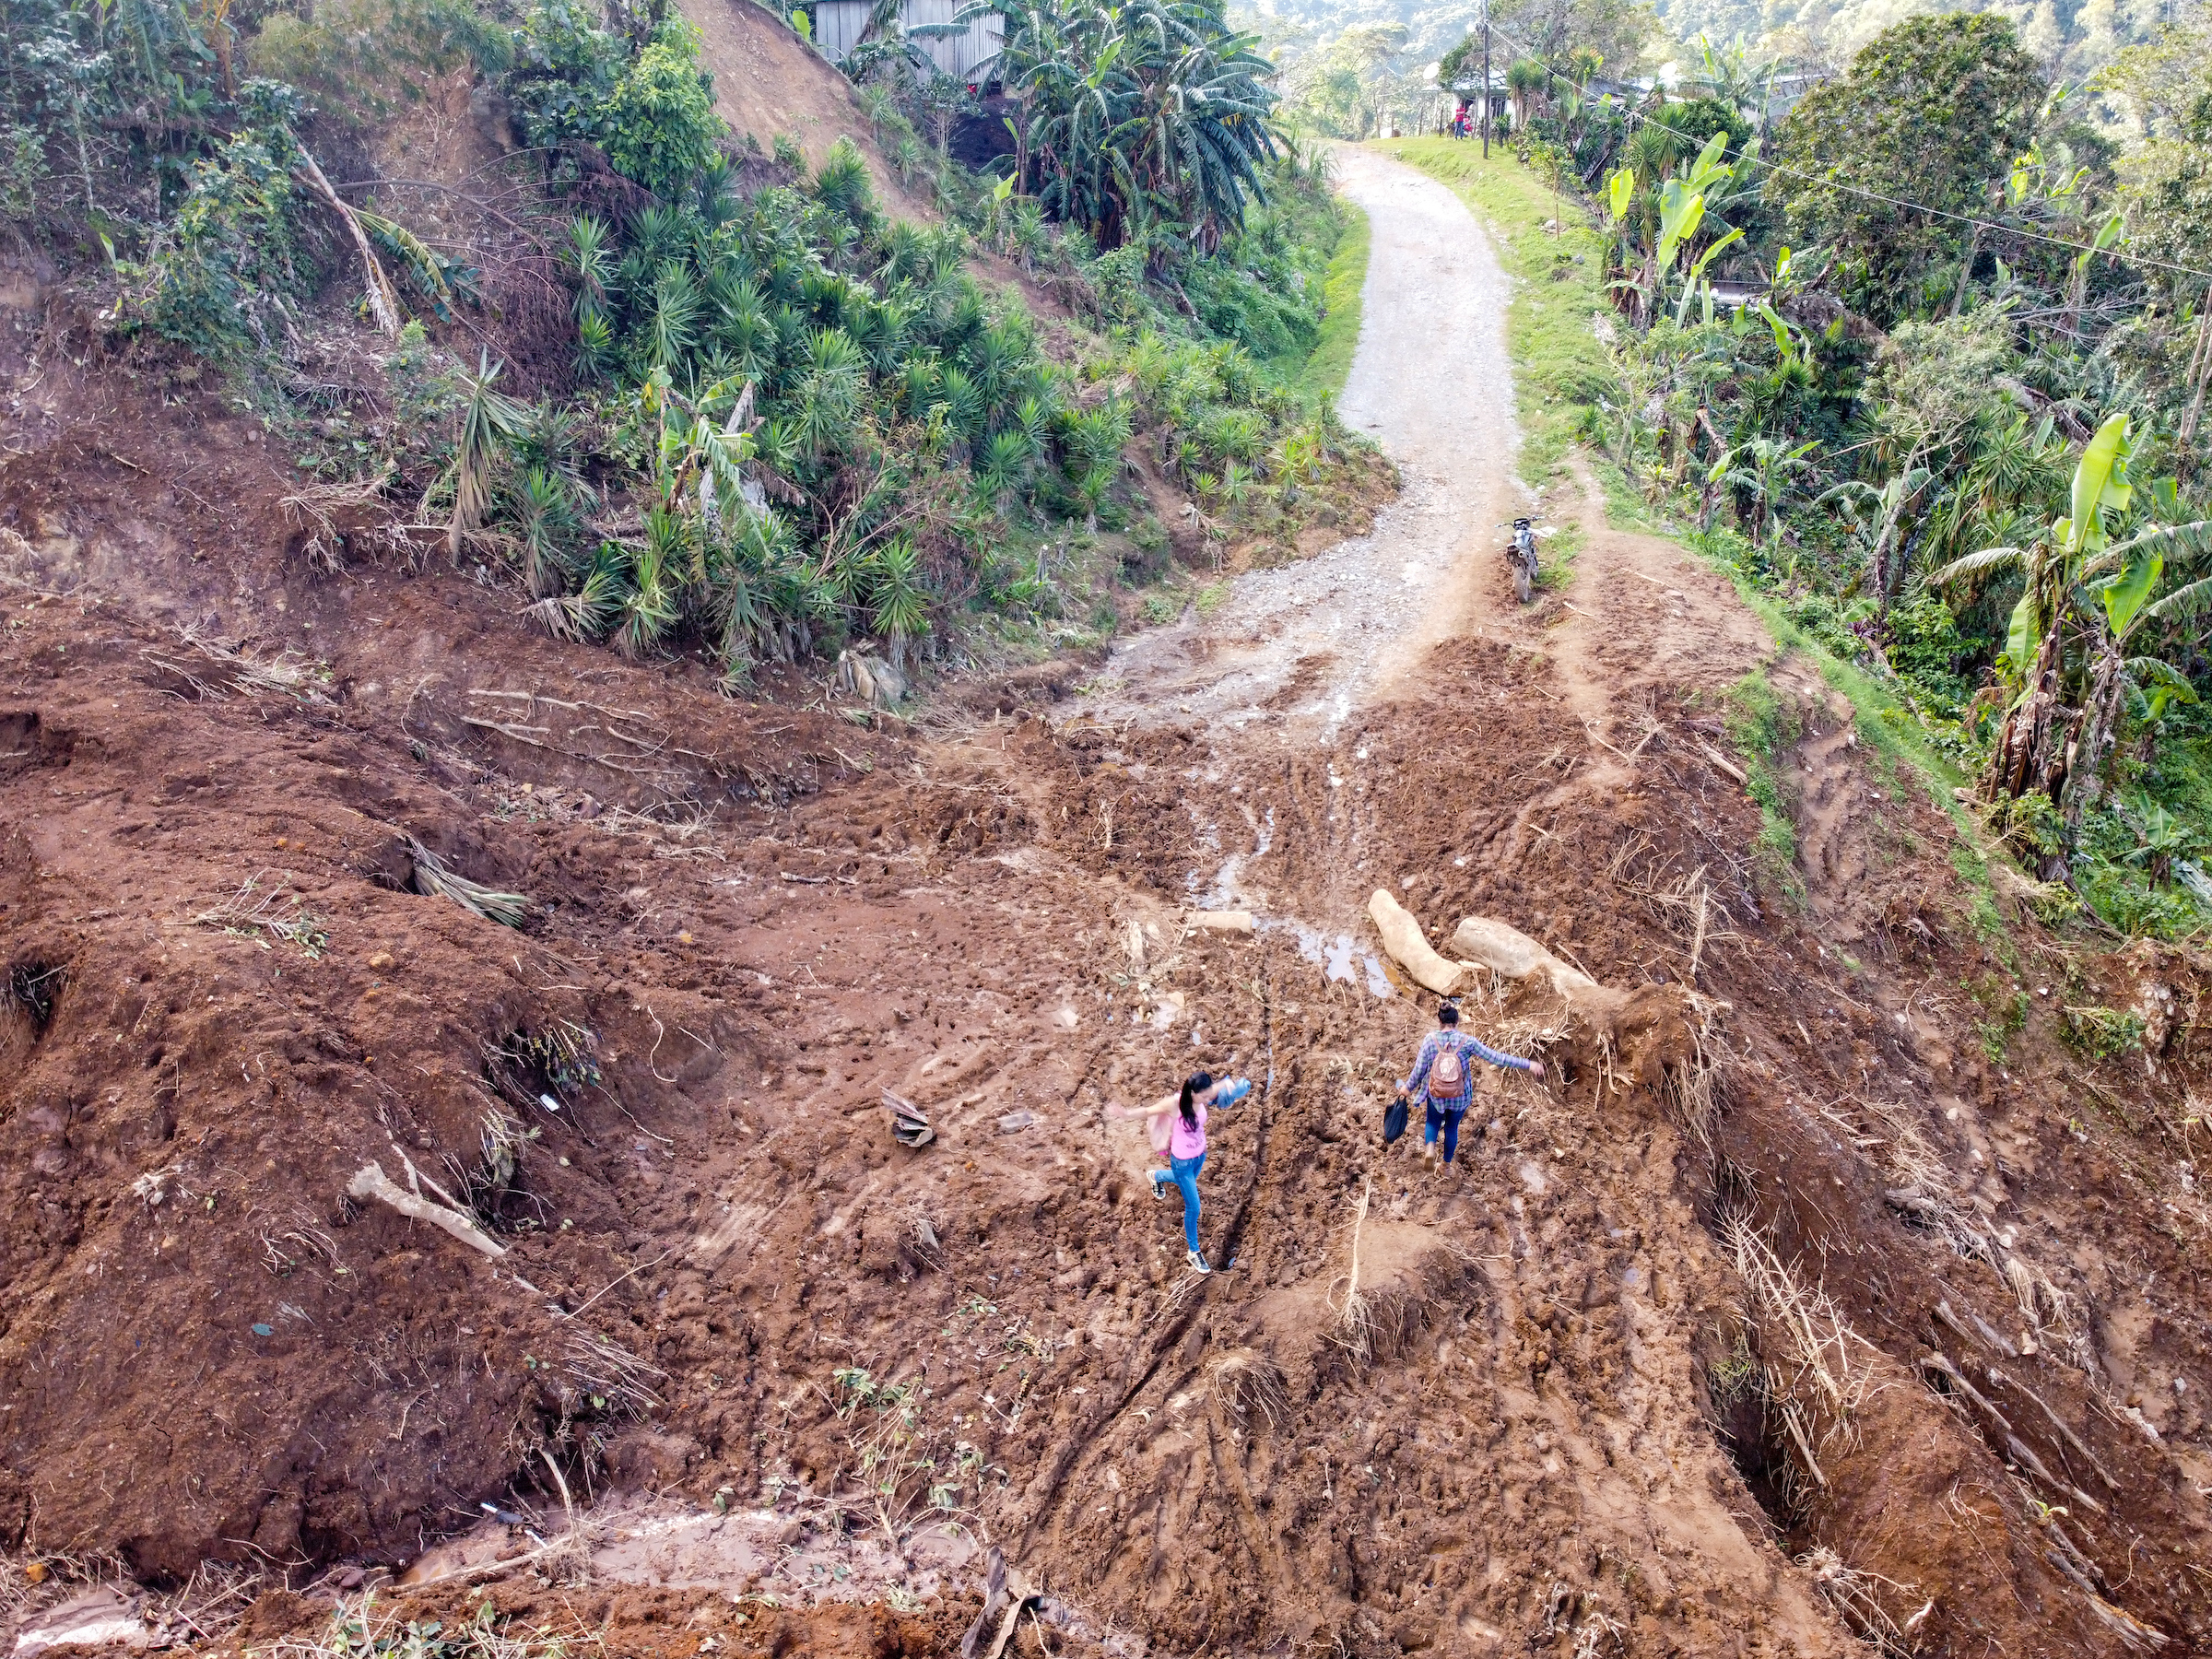 Women clamber over a road washed out by a landslide in San Luis Planes after Hurricane Iota.